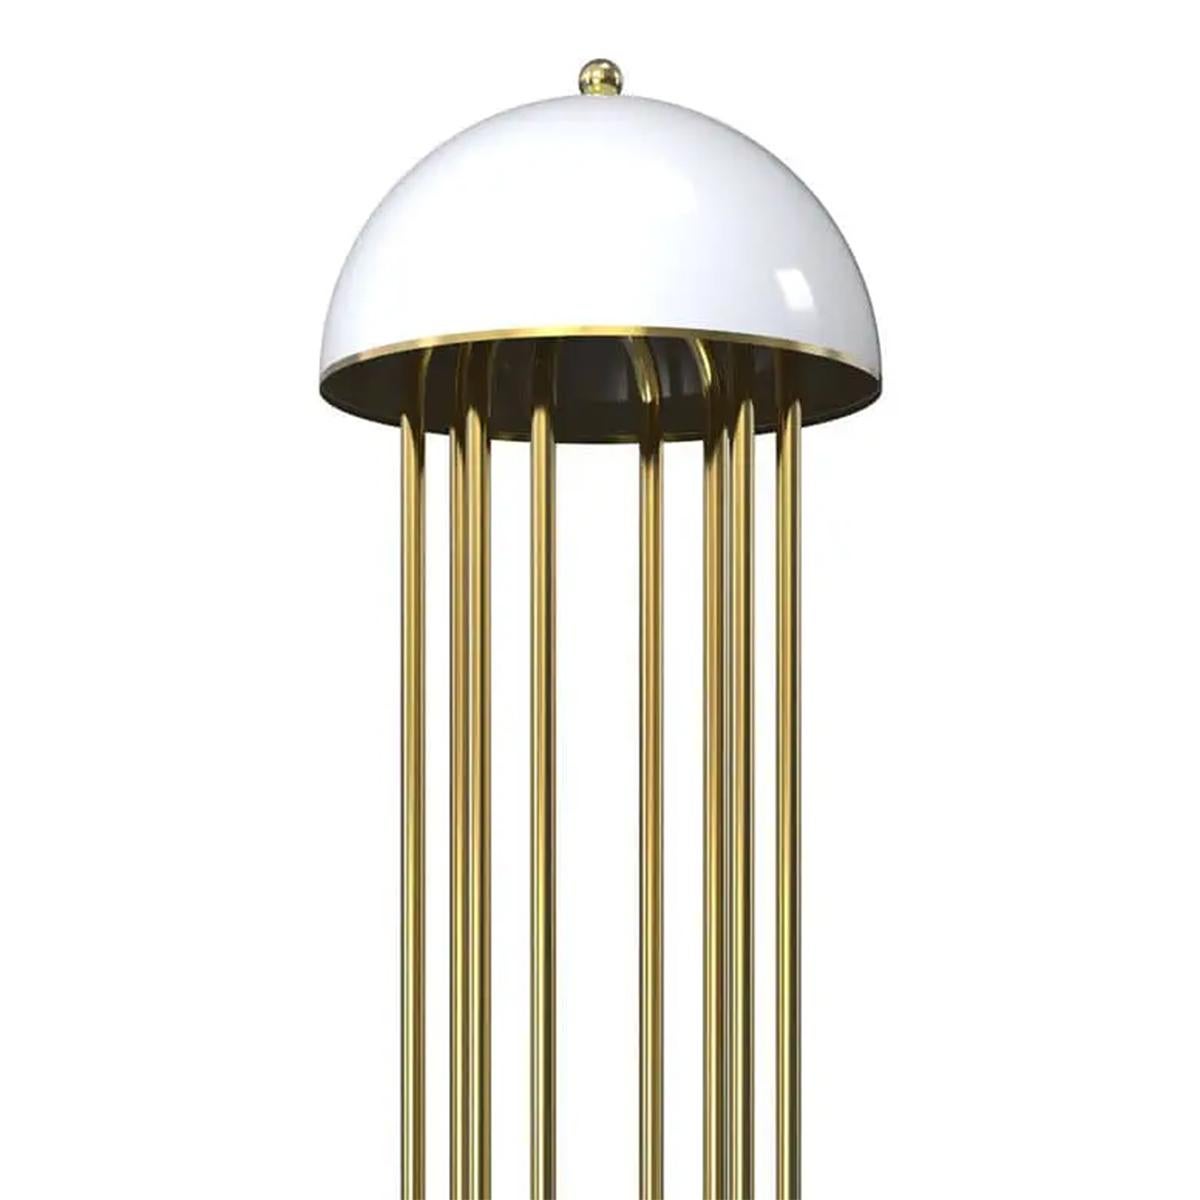 Floor lamp Aurea with solid brass structure in polished finish and 
with white aluminium base and shade. Brass parts are swiveled.
With 4 bulbs, lamp holder type G9 LED bulbs, 4 Watts, not dimmable,
bulbs not included.